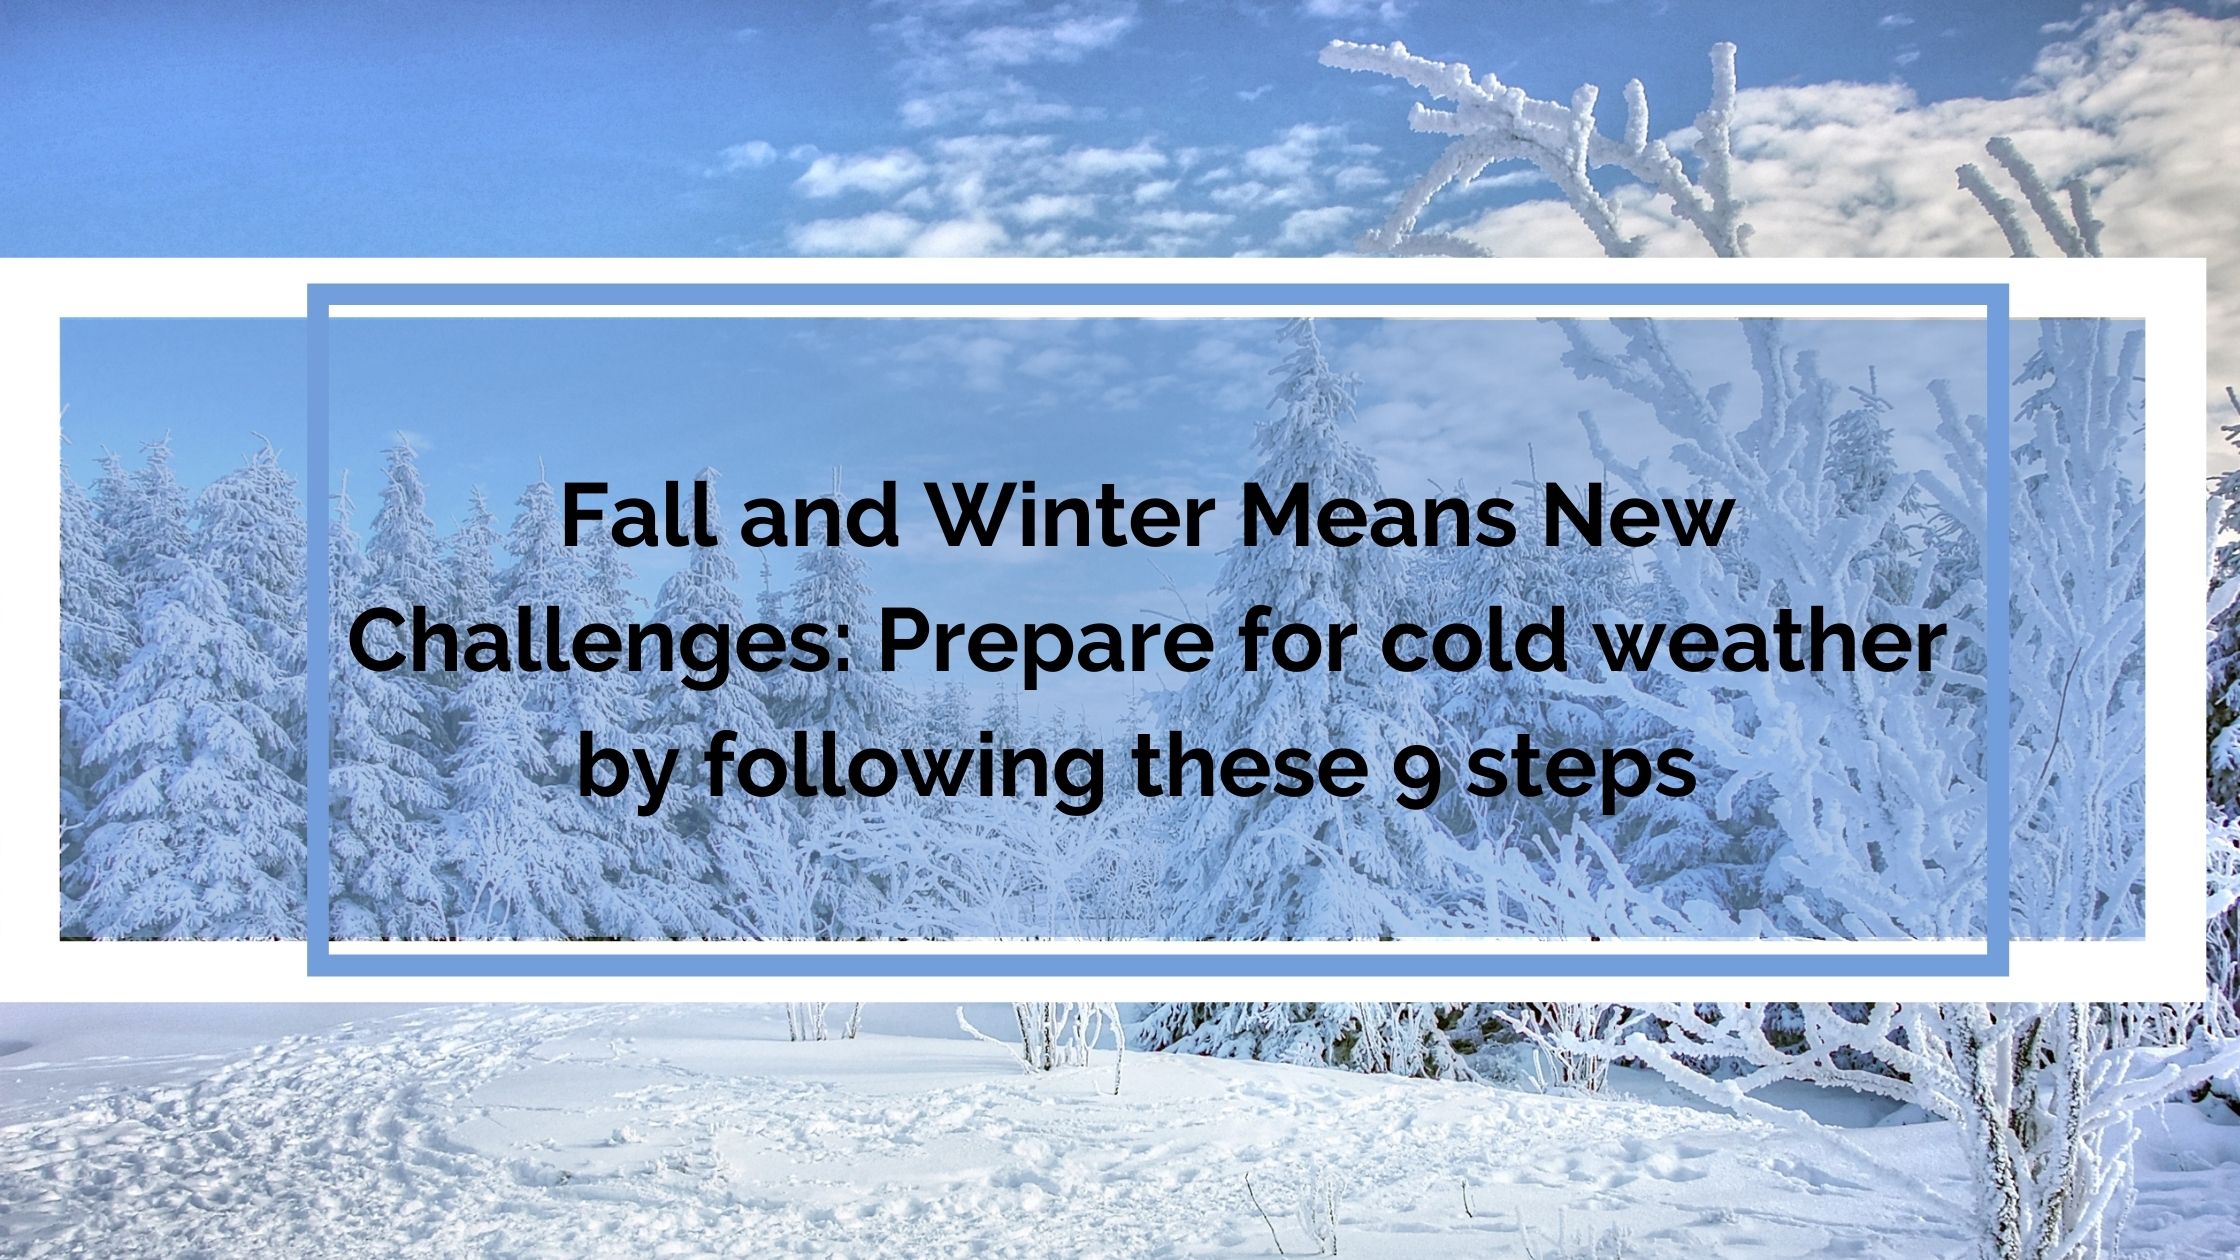 Fall and Winter Means New Challenges Prepare for cold weather by following these 9 steps